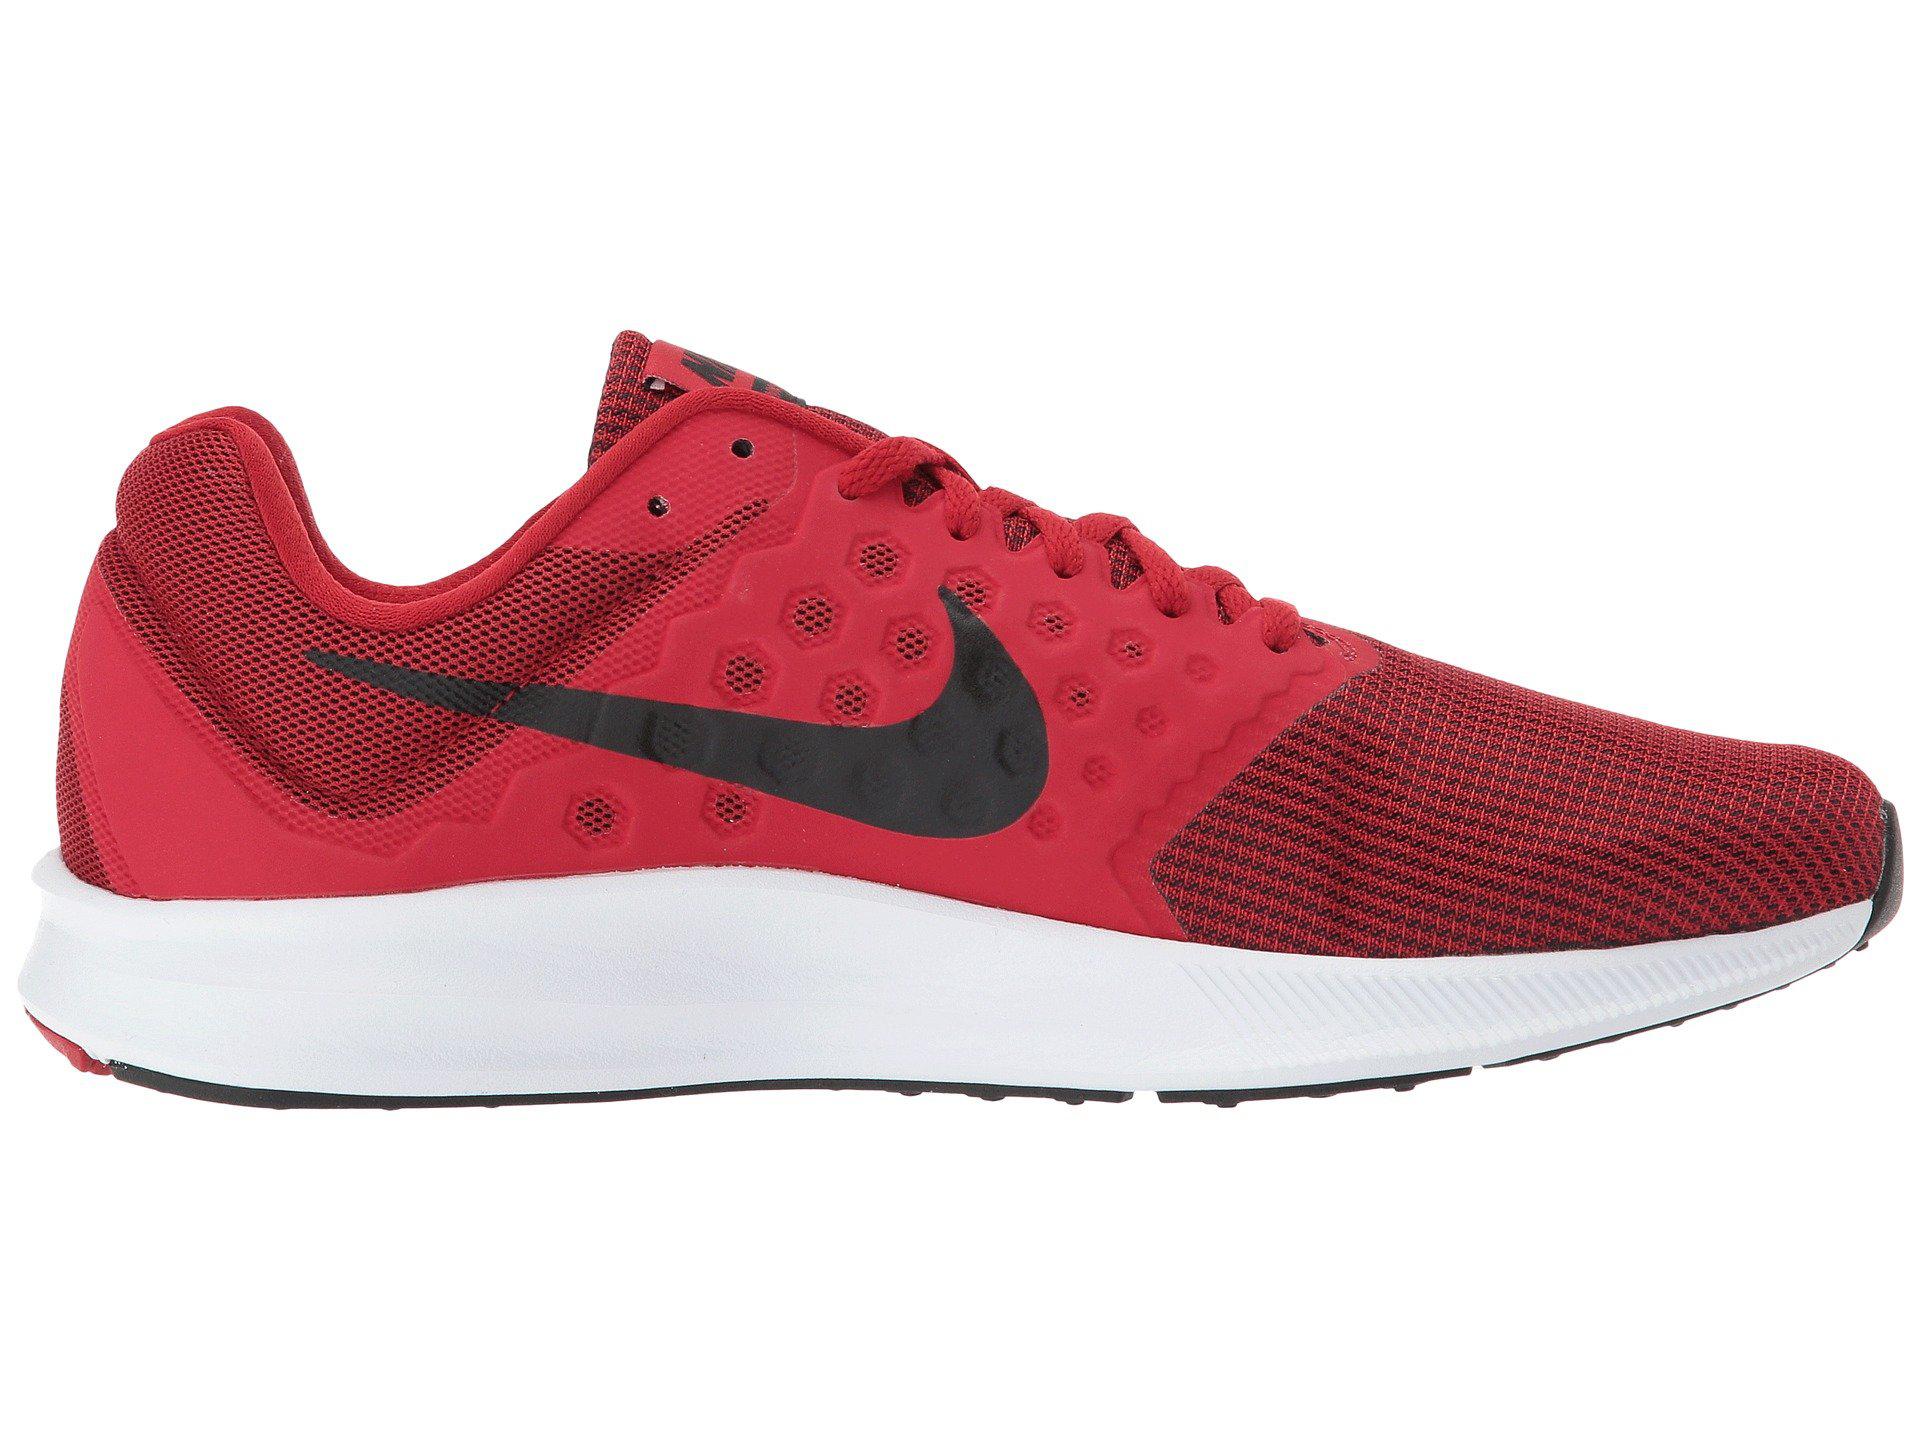 Nike Synthetic Downshifter 7 Running Shoe in Red/Black (Red) for Men - Lyst